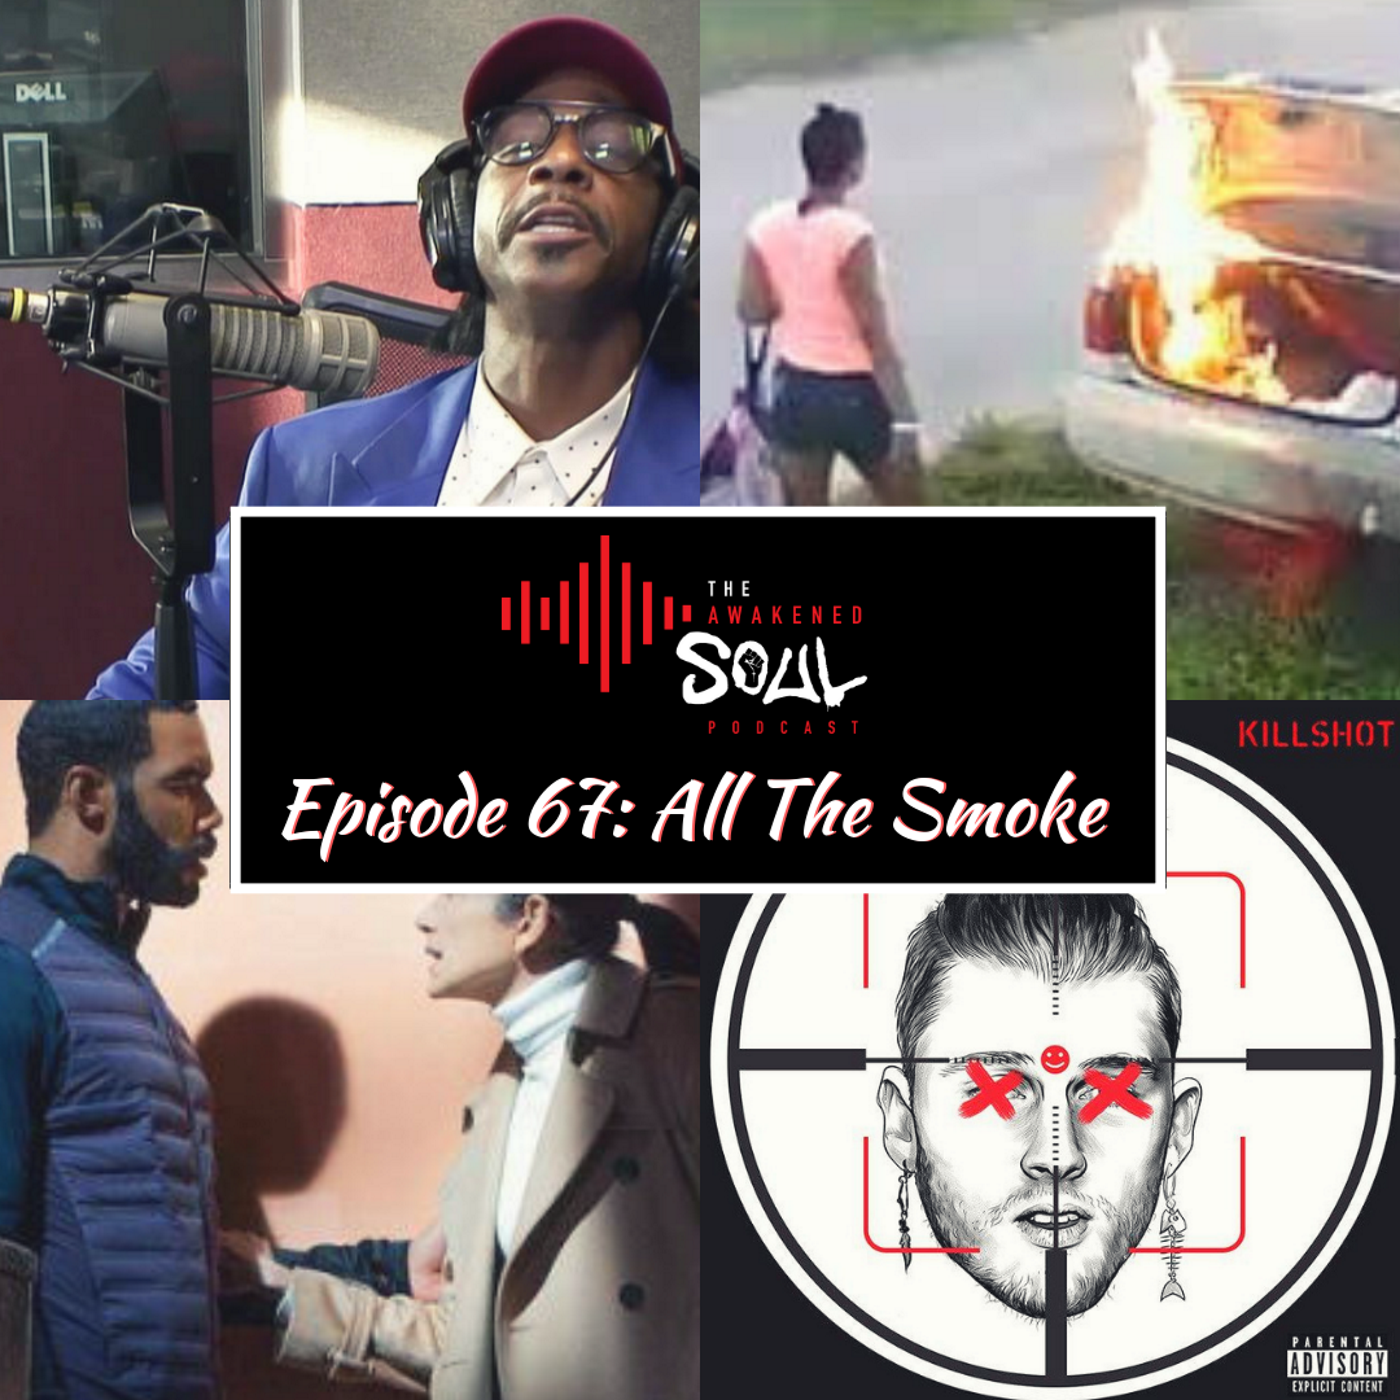 Episode 67: All The Smoke